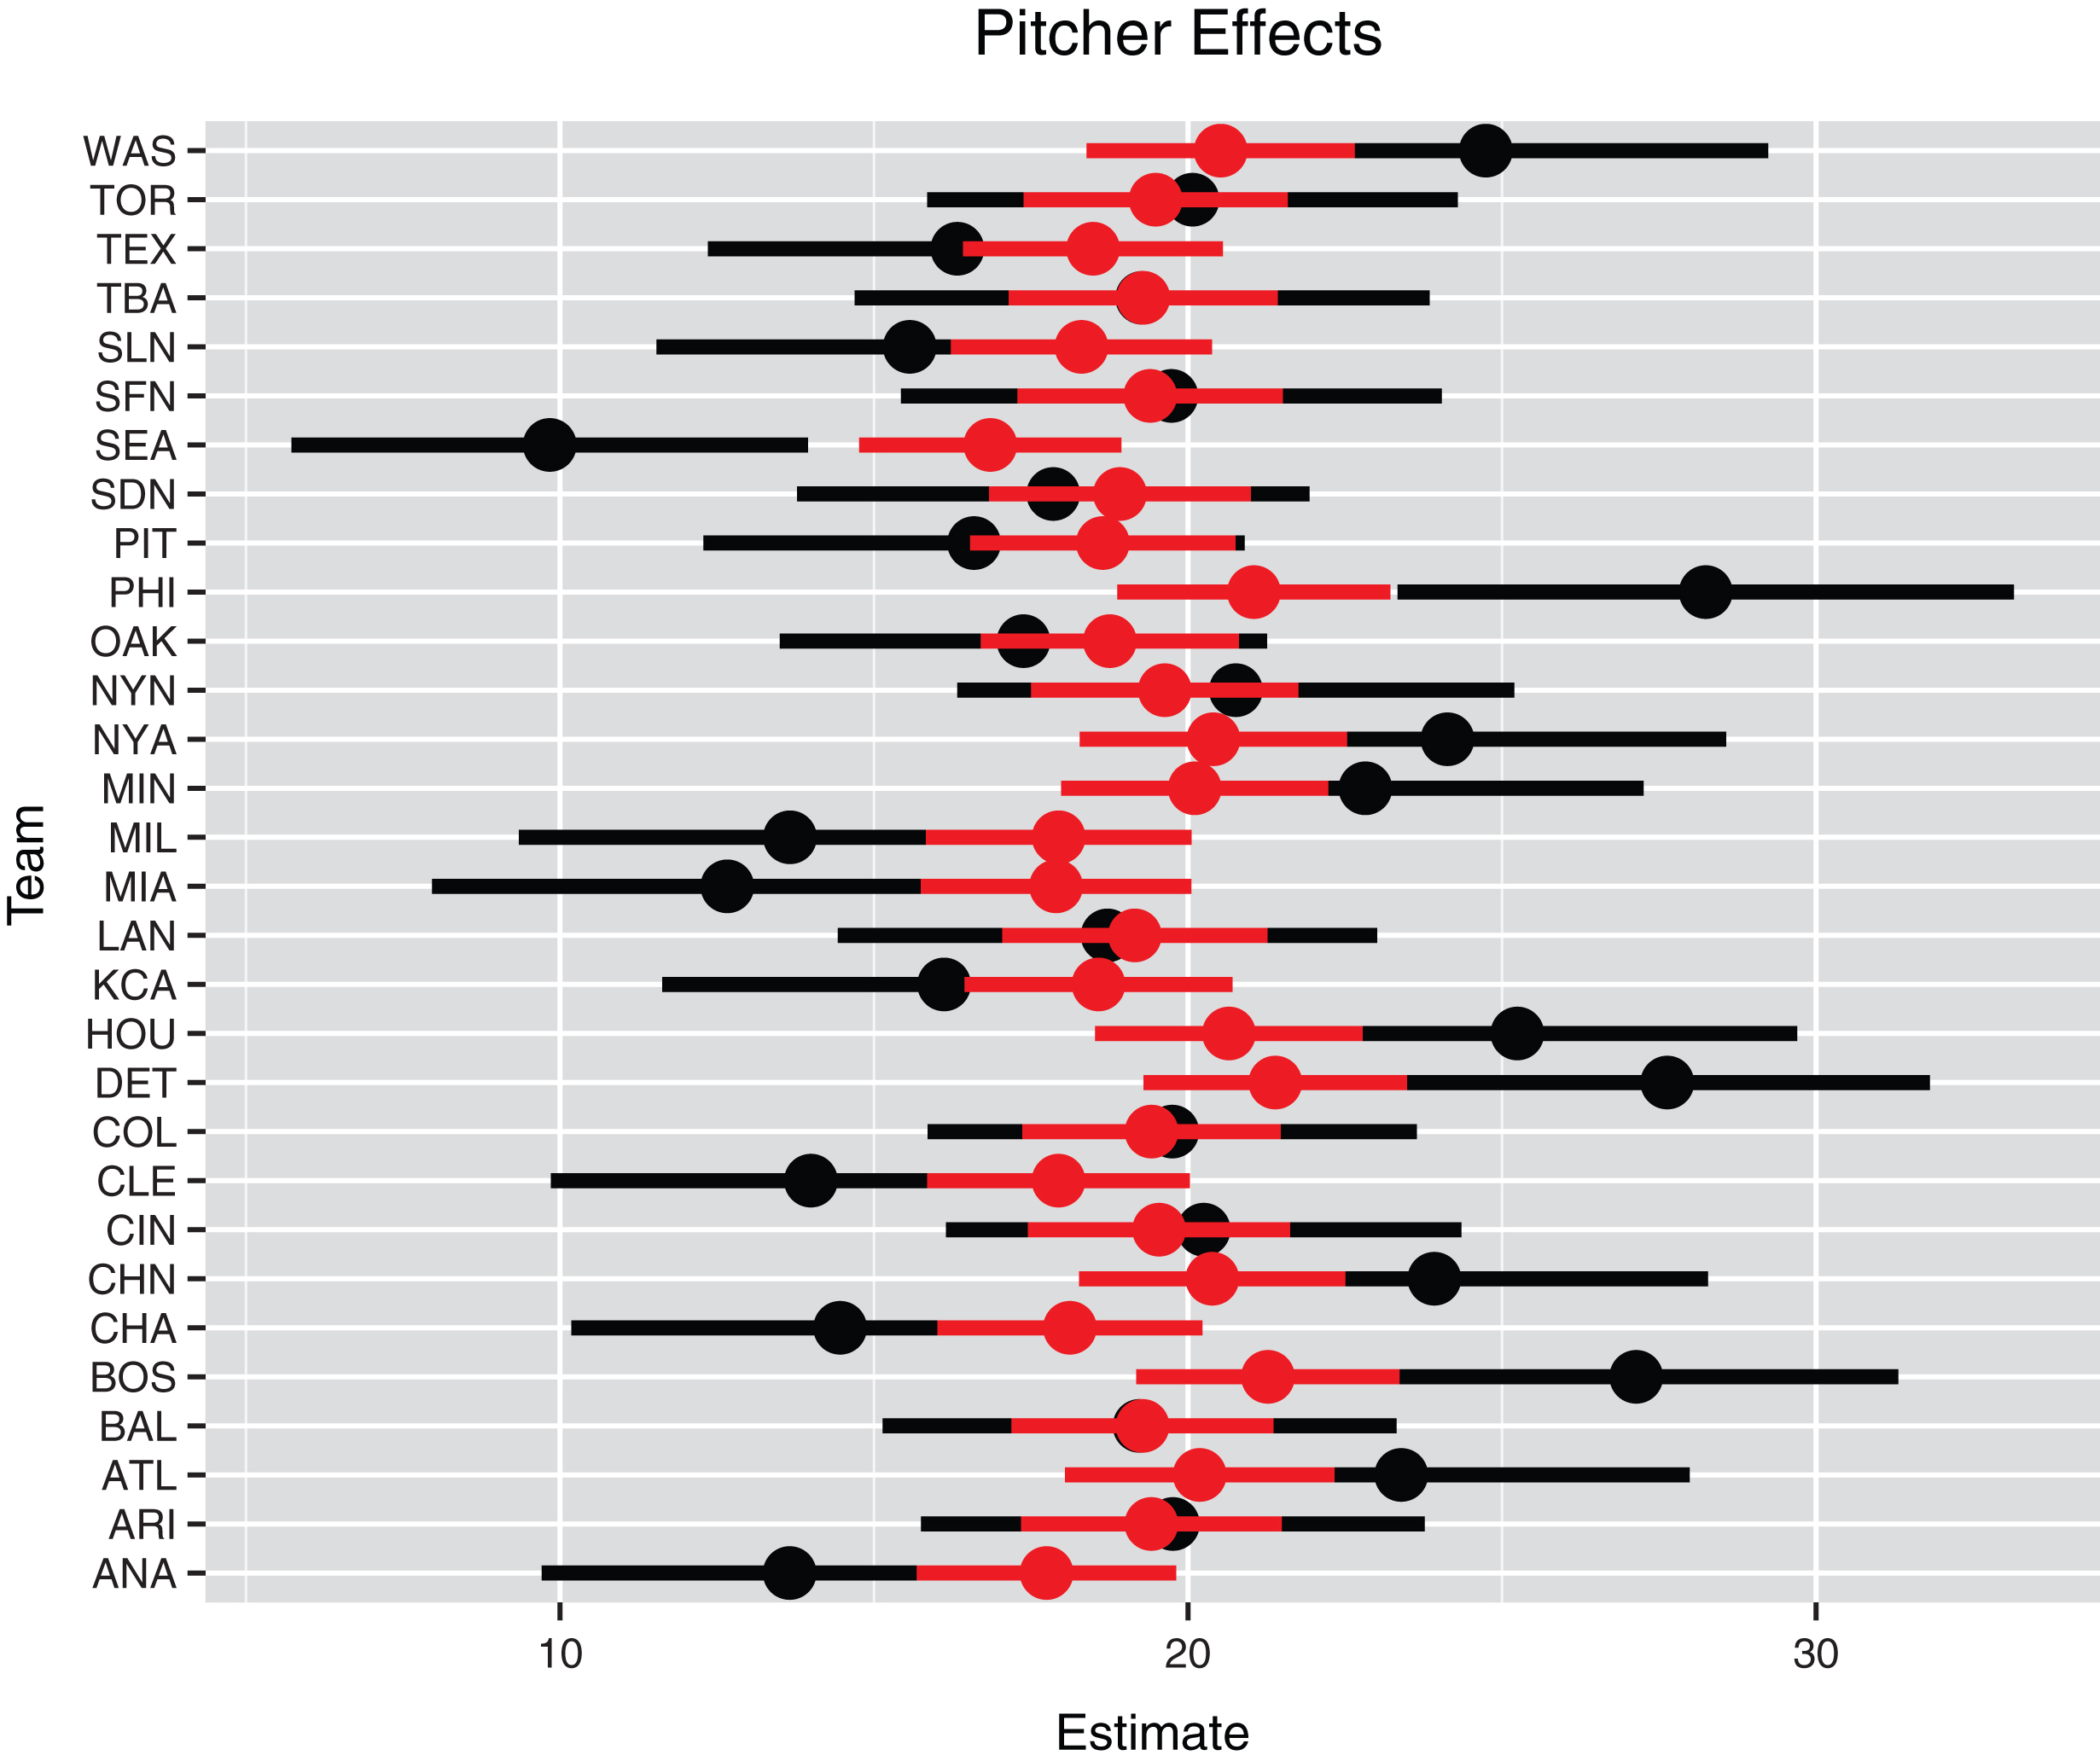 Individual and multilevel pitcher effects for all teams. The black line represents the individual estimate plus and minus the standard error and the red line represents the multilevel estimate plus and minus the standard error.